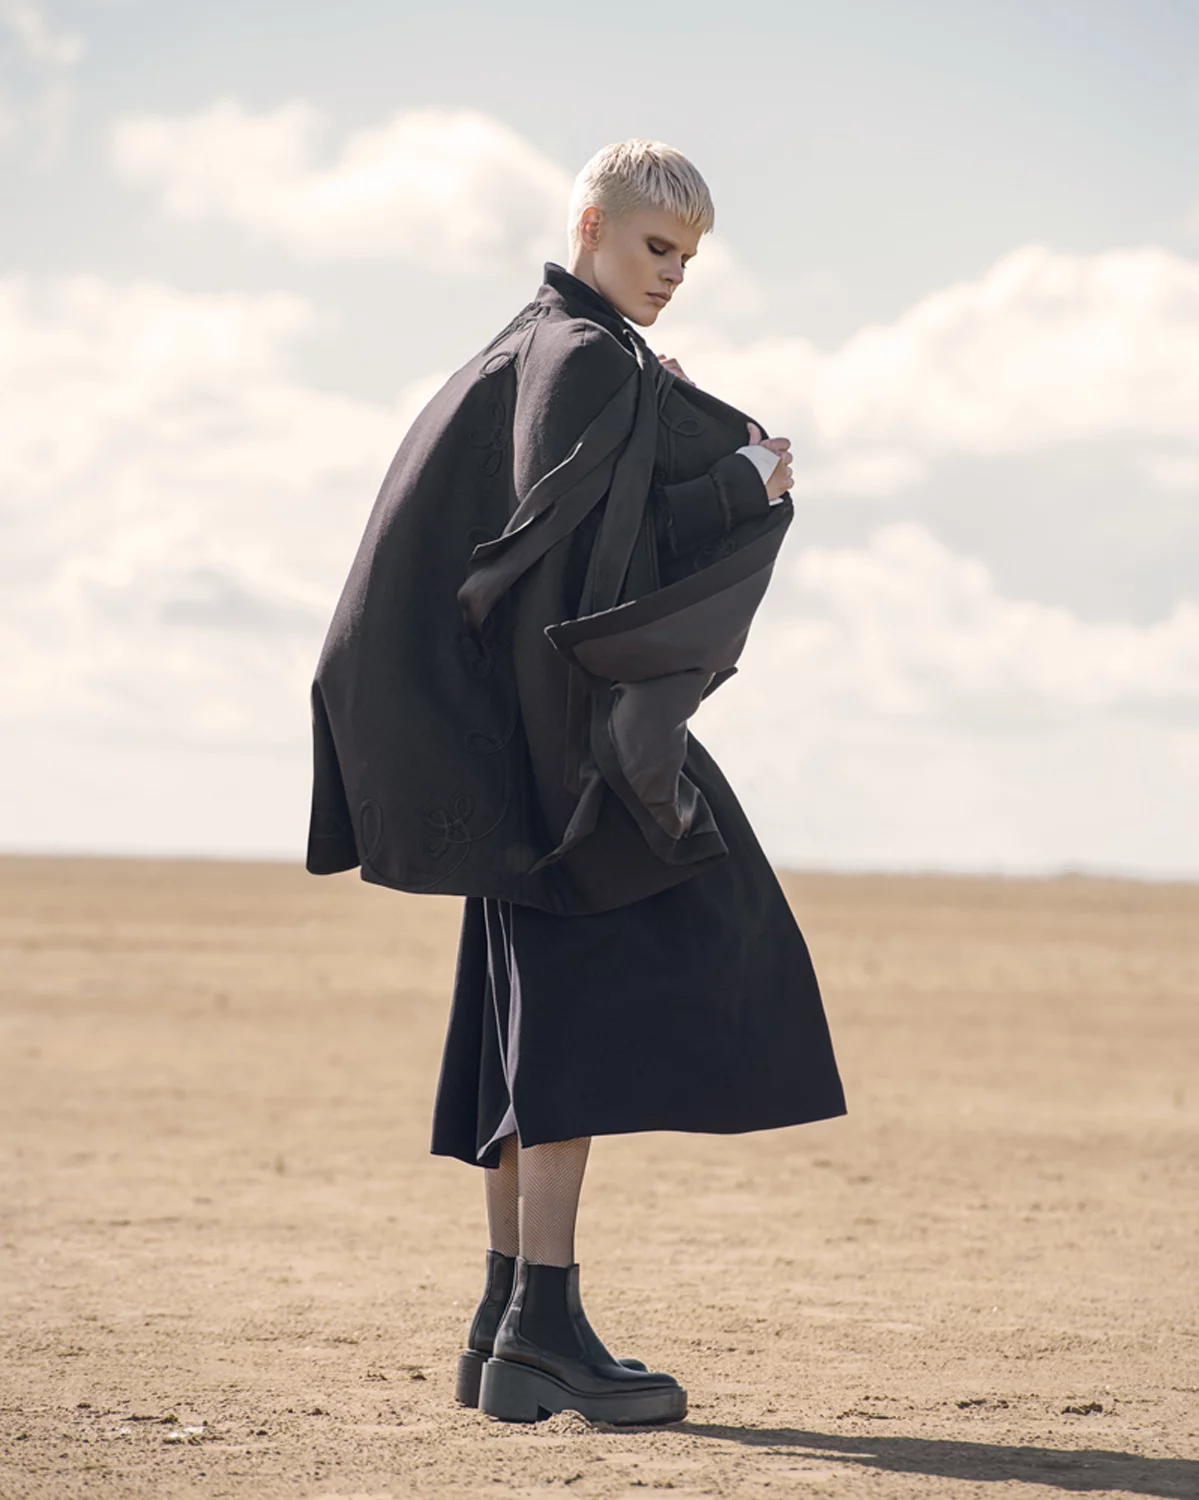 Vogue Russia 6 by Andreas ORTNER